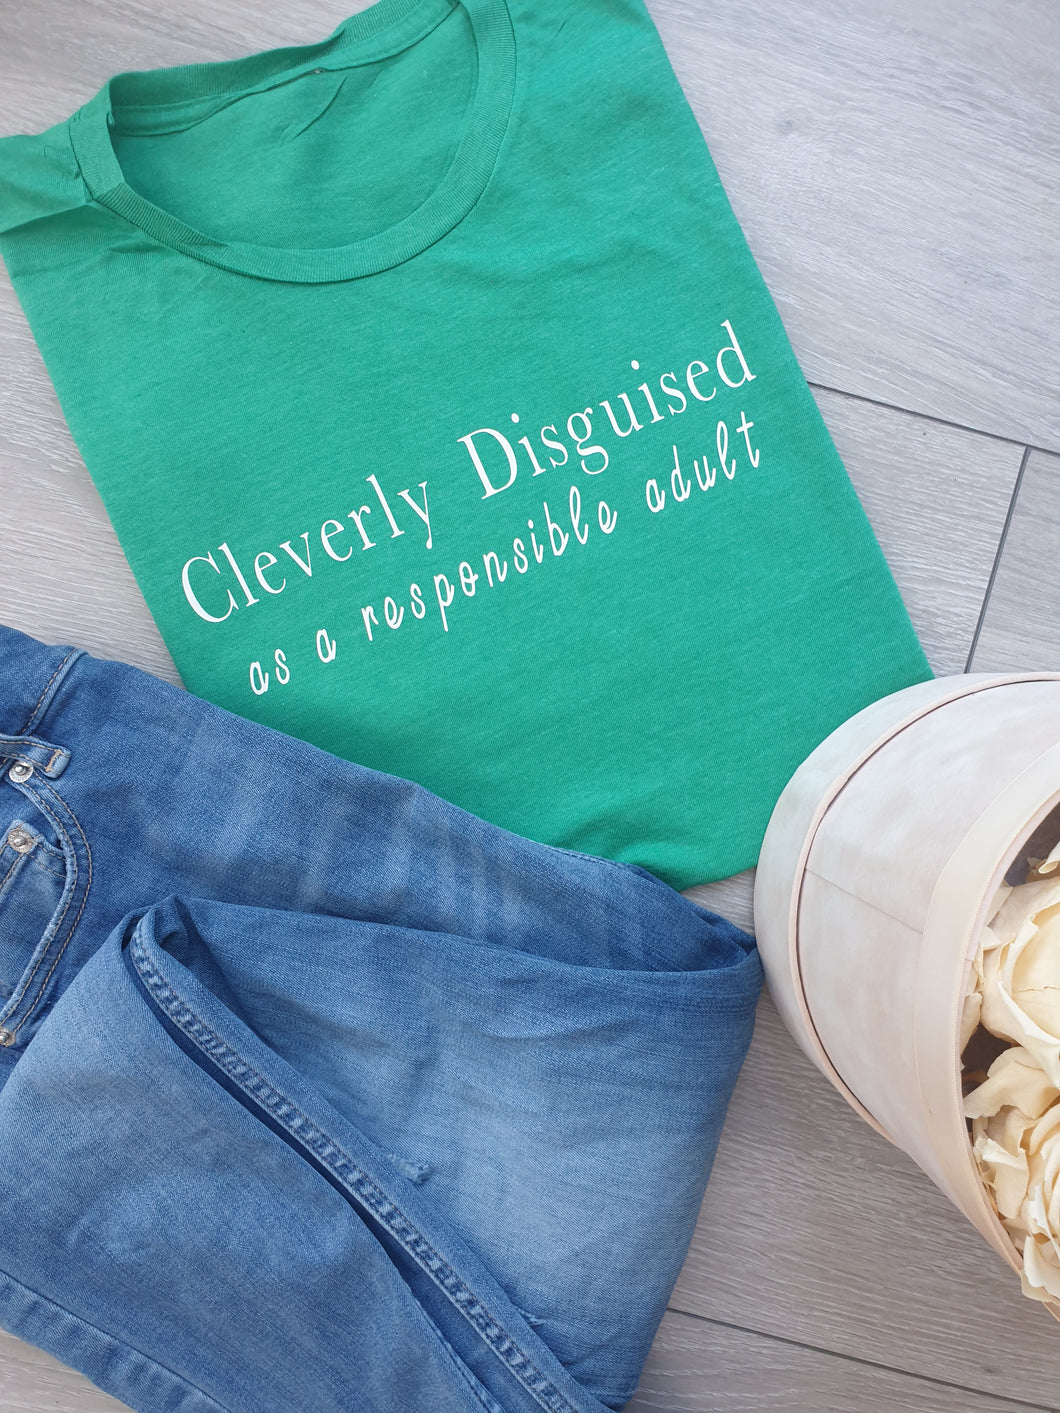 Cleverly Disguised Adults Unisex Tee